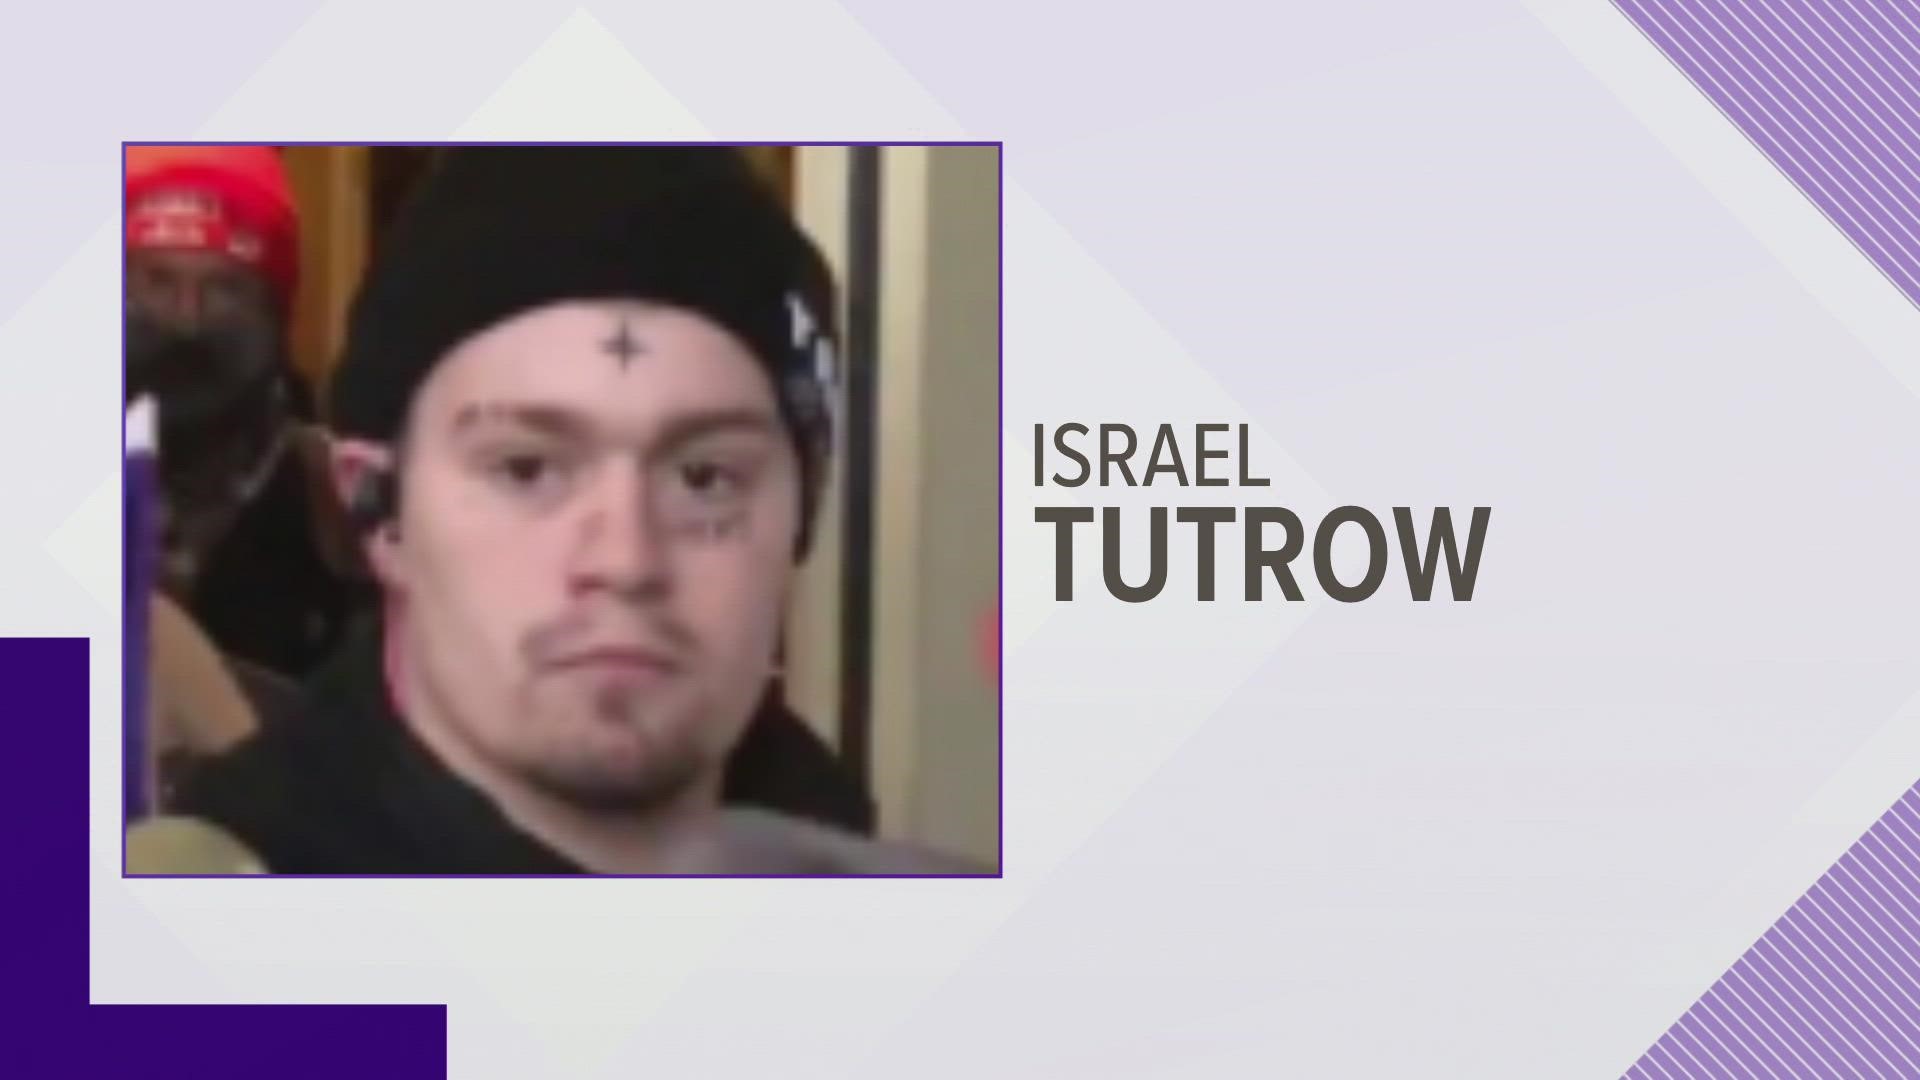 The first 60 days of Israel Tutrow's probation are at-home detention. He is also ordered to pay $500 in restitution and can't own a firearm during his probation.